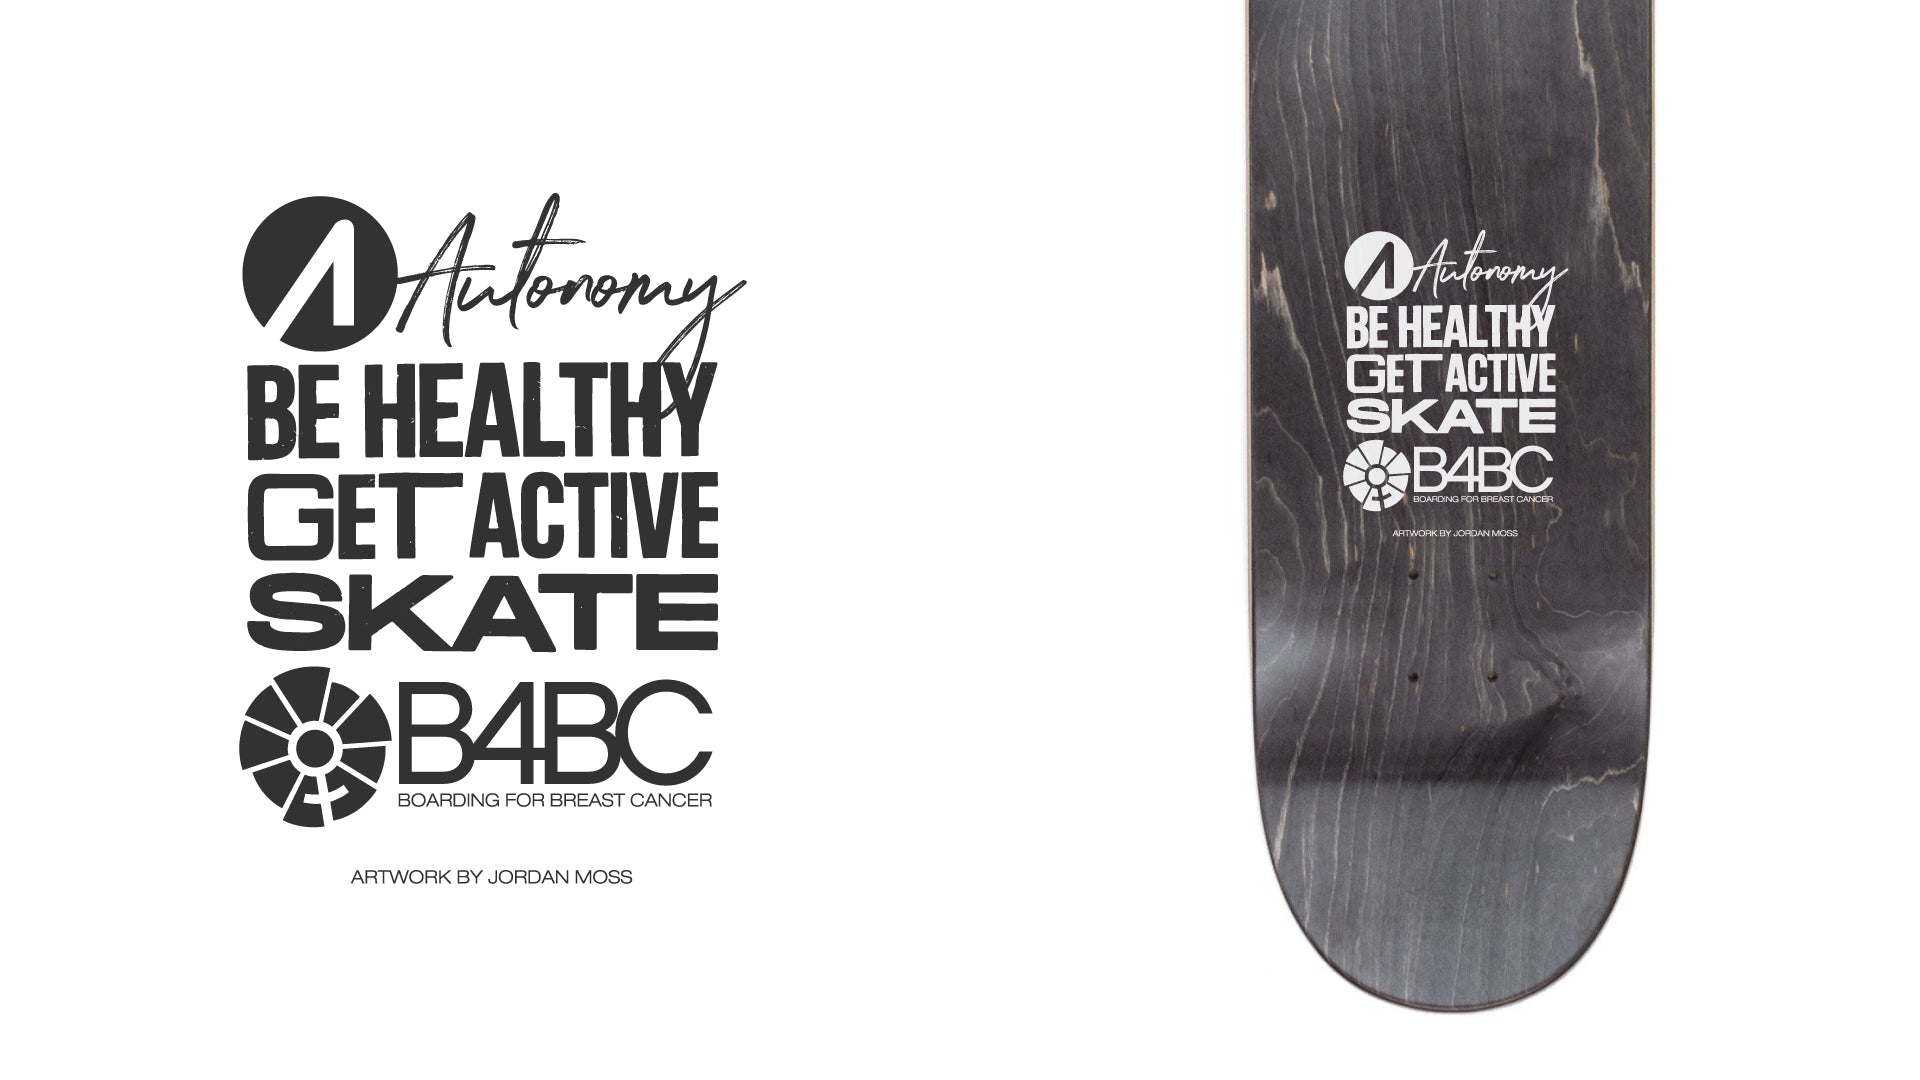 "Be Healthy Get Active" Ad for Autonomy Skateboards